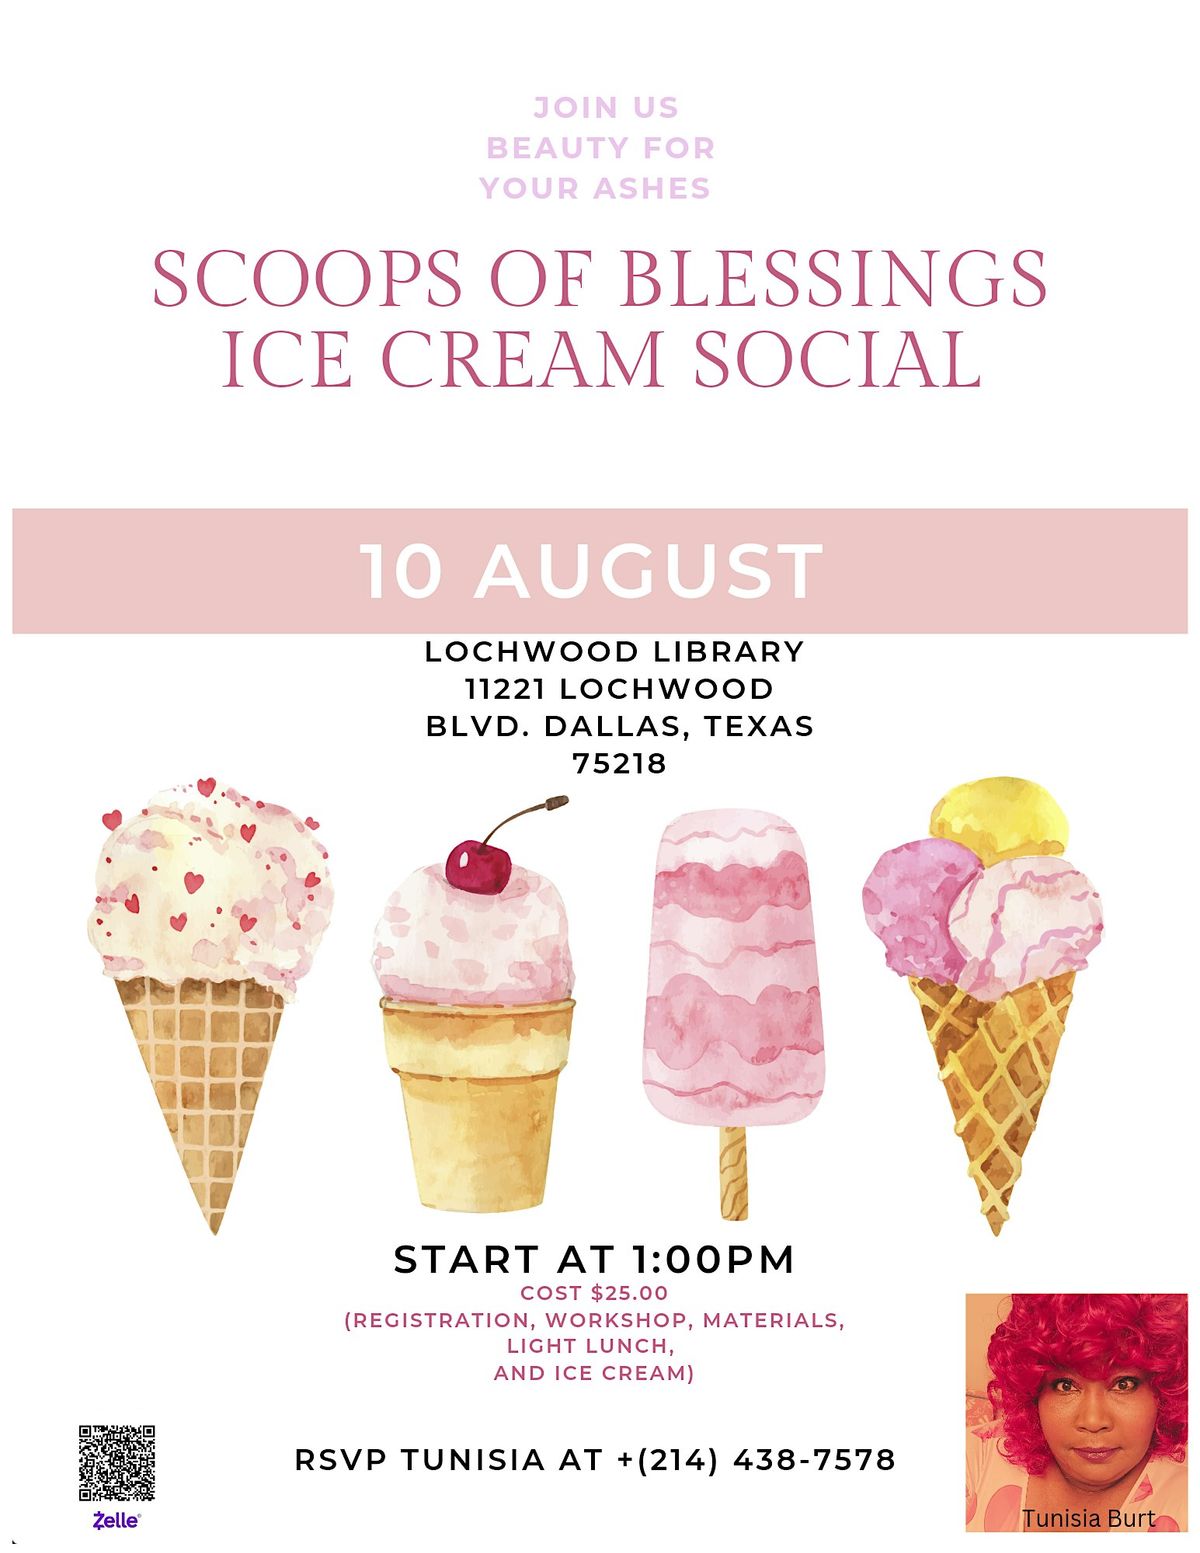 SCOOPS OF BLESSINGS ICE CREAM SOCIAL